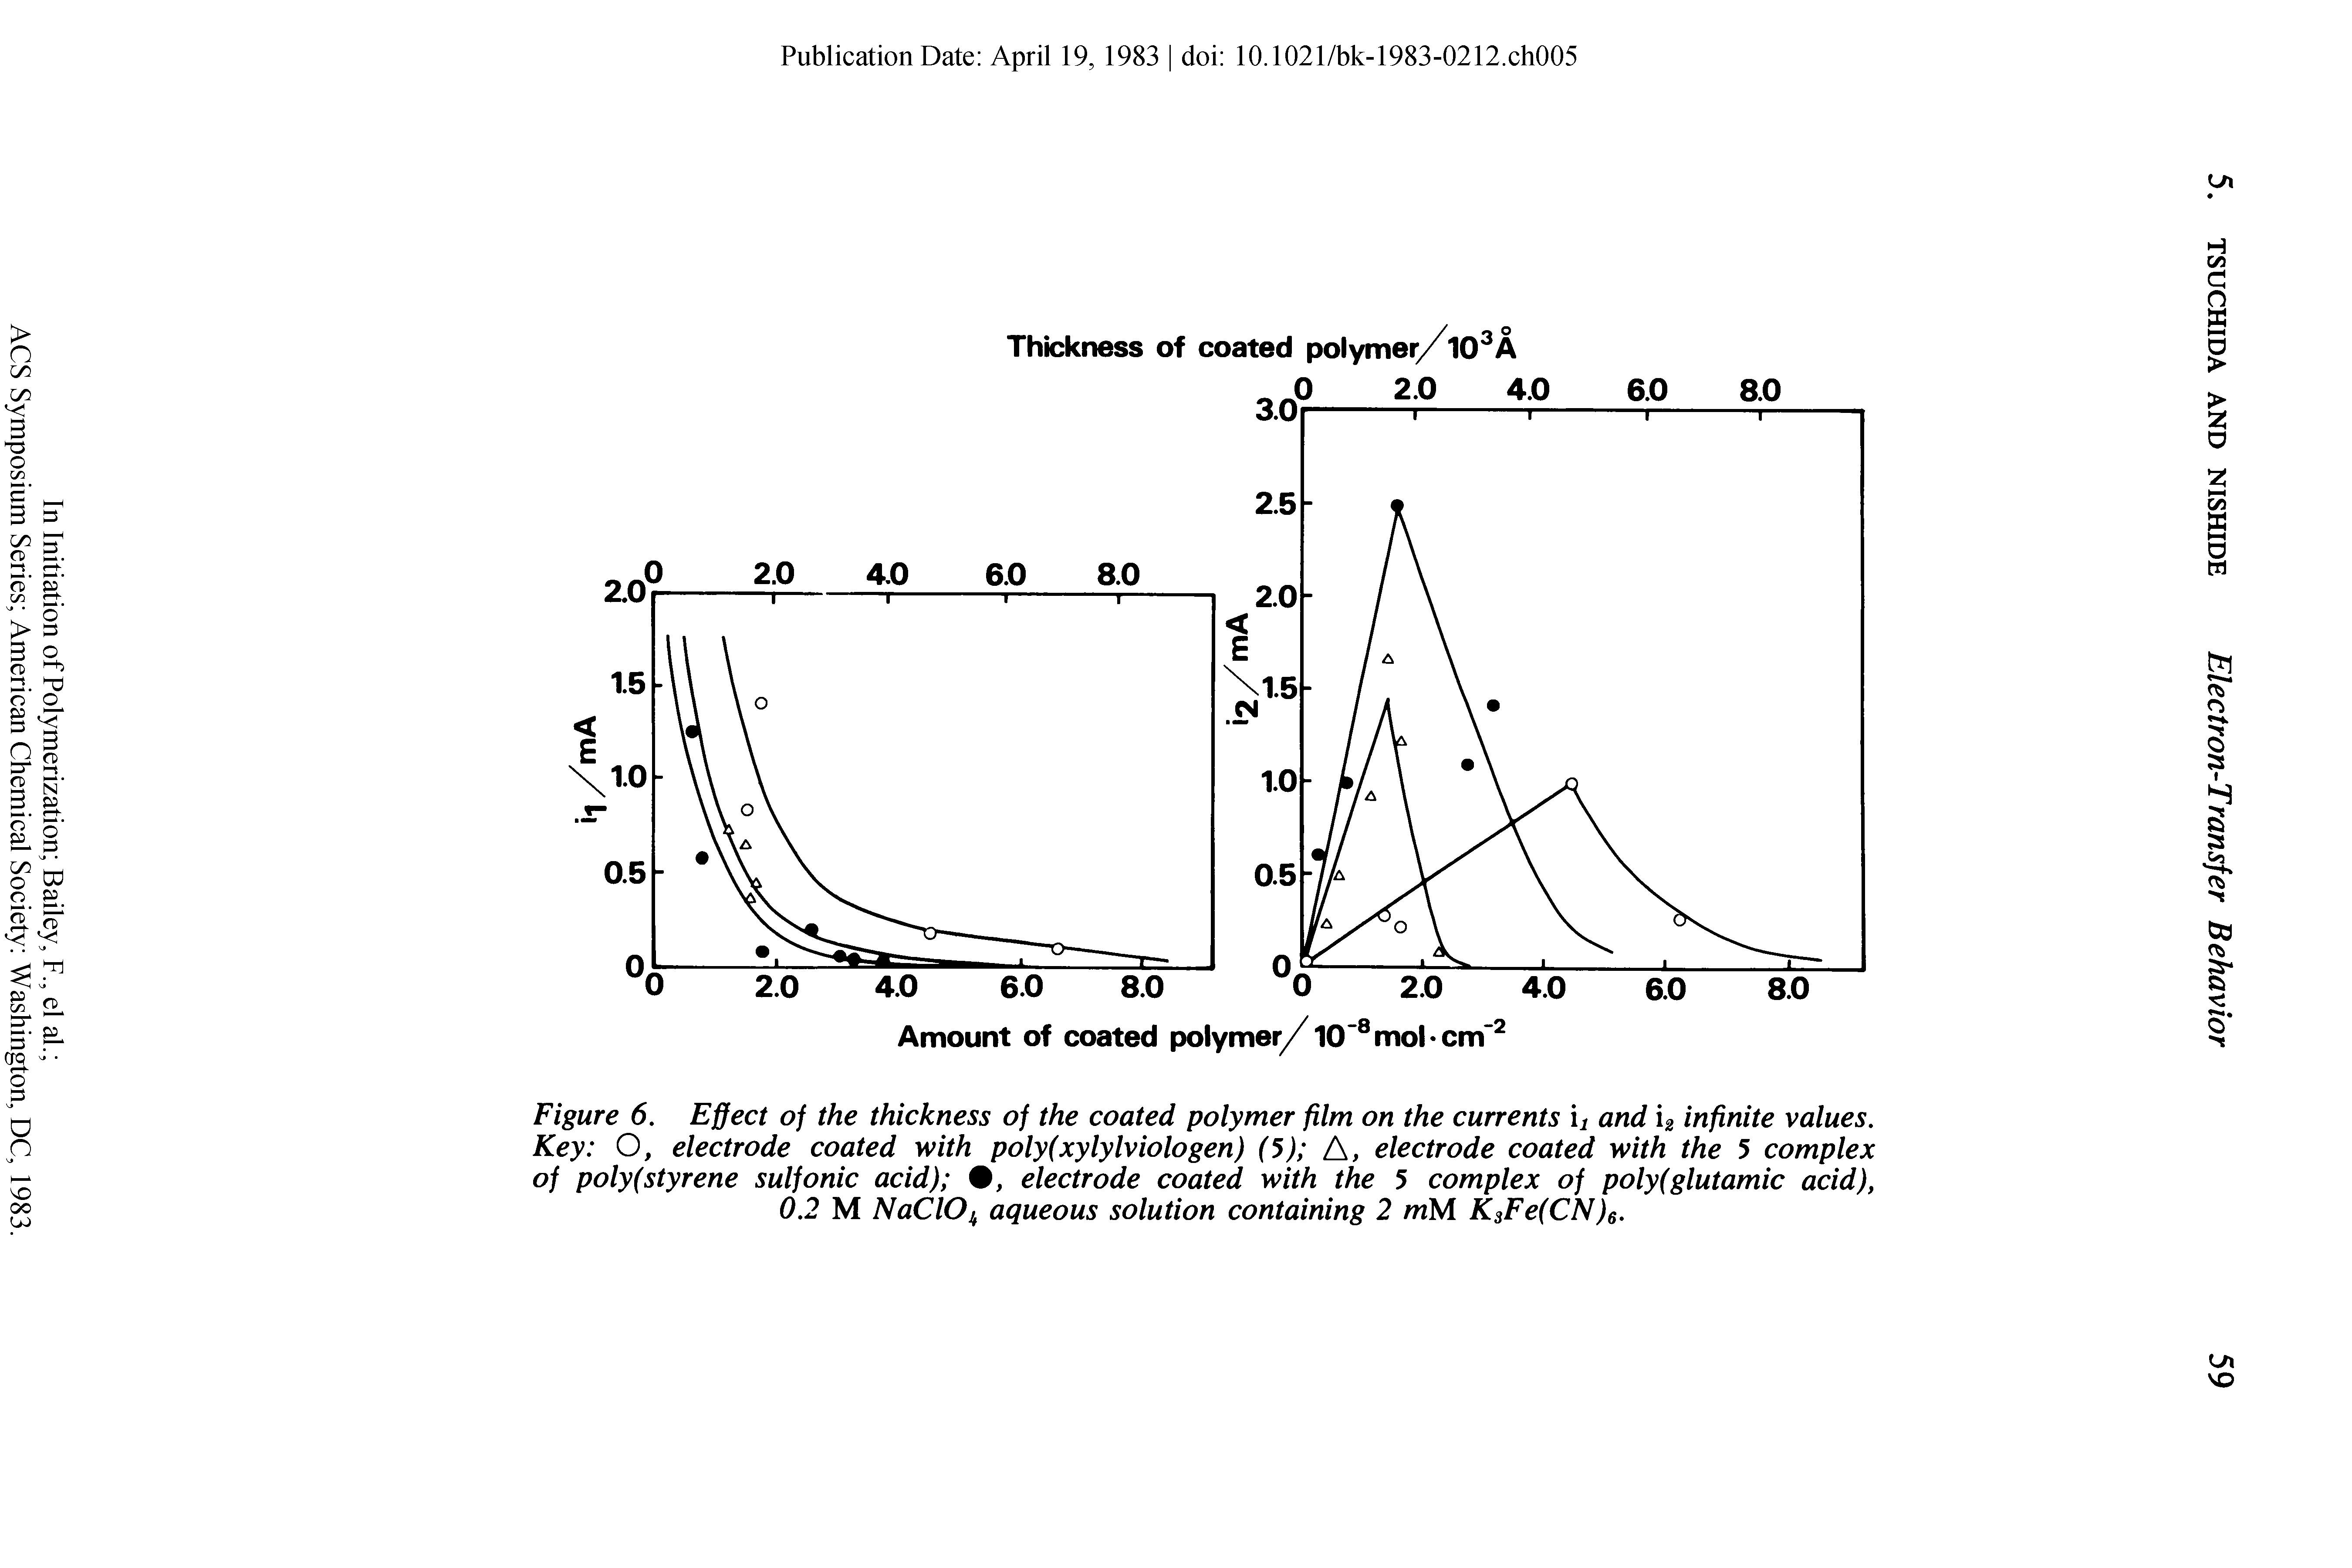 Figure 6. Effect of the thickness of the coated polymer film on the currents ii and h infinite values. Key O, electrode coated with poly(xylylviologen) (5) A, electrode coated with the 5 complex of poly (styrene sulfonic acid) , electrode coated with the 5 complex of poly( glutamic acid), 0.2 M NaClO aqueous solution containing 2 mM KsFe(CN)6.